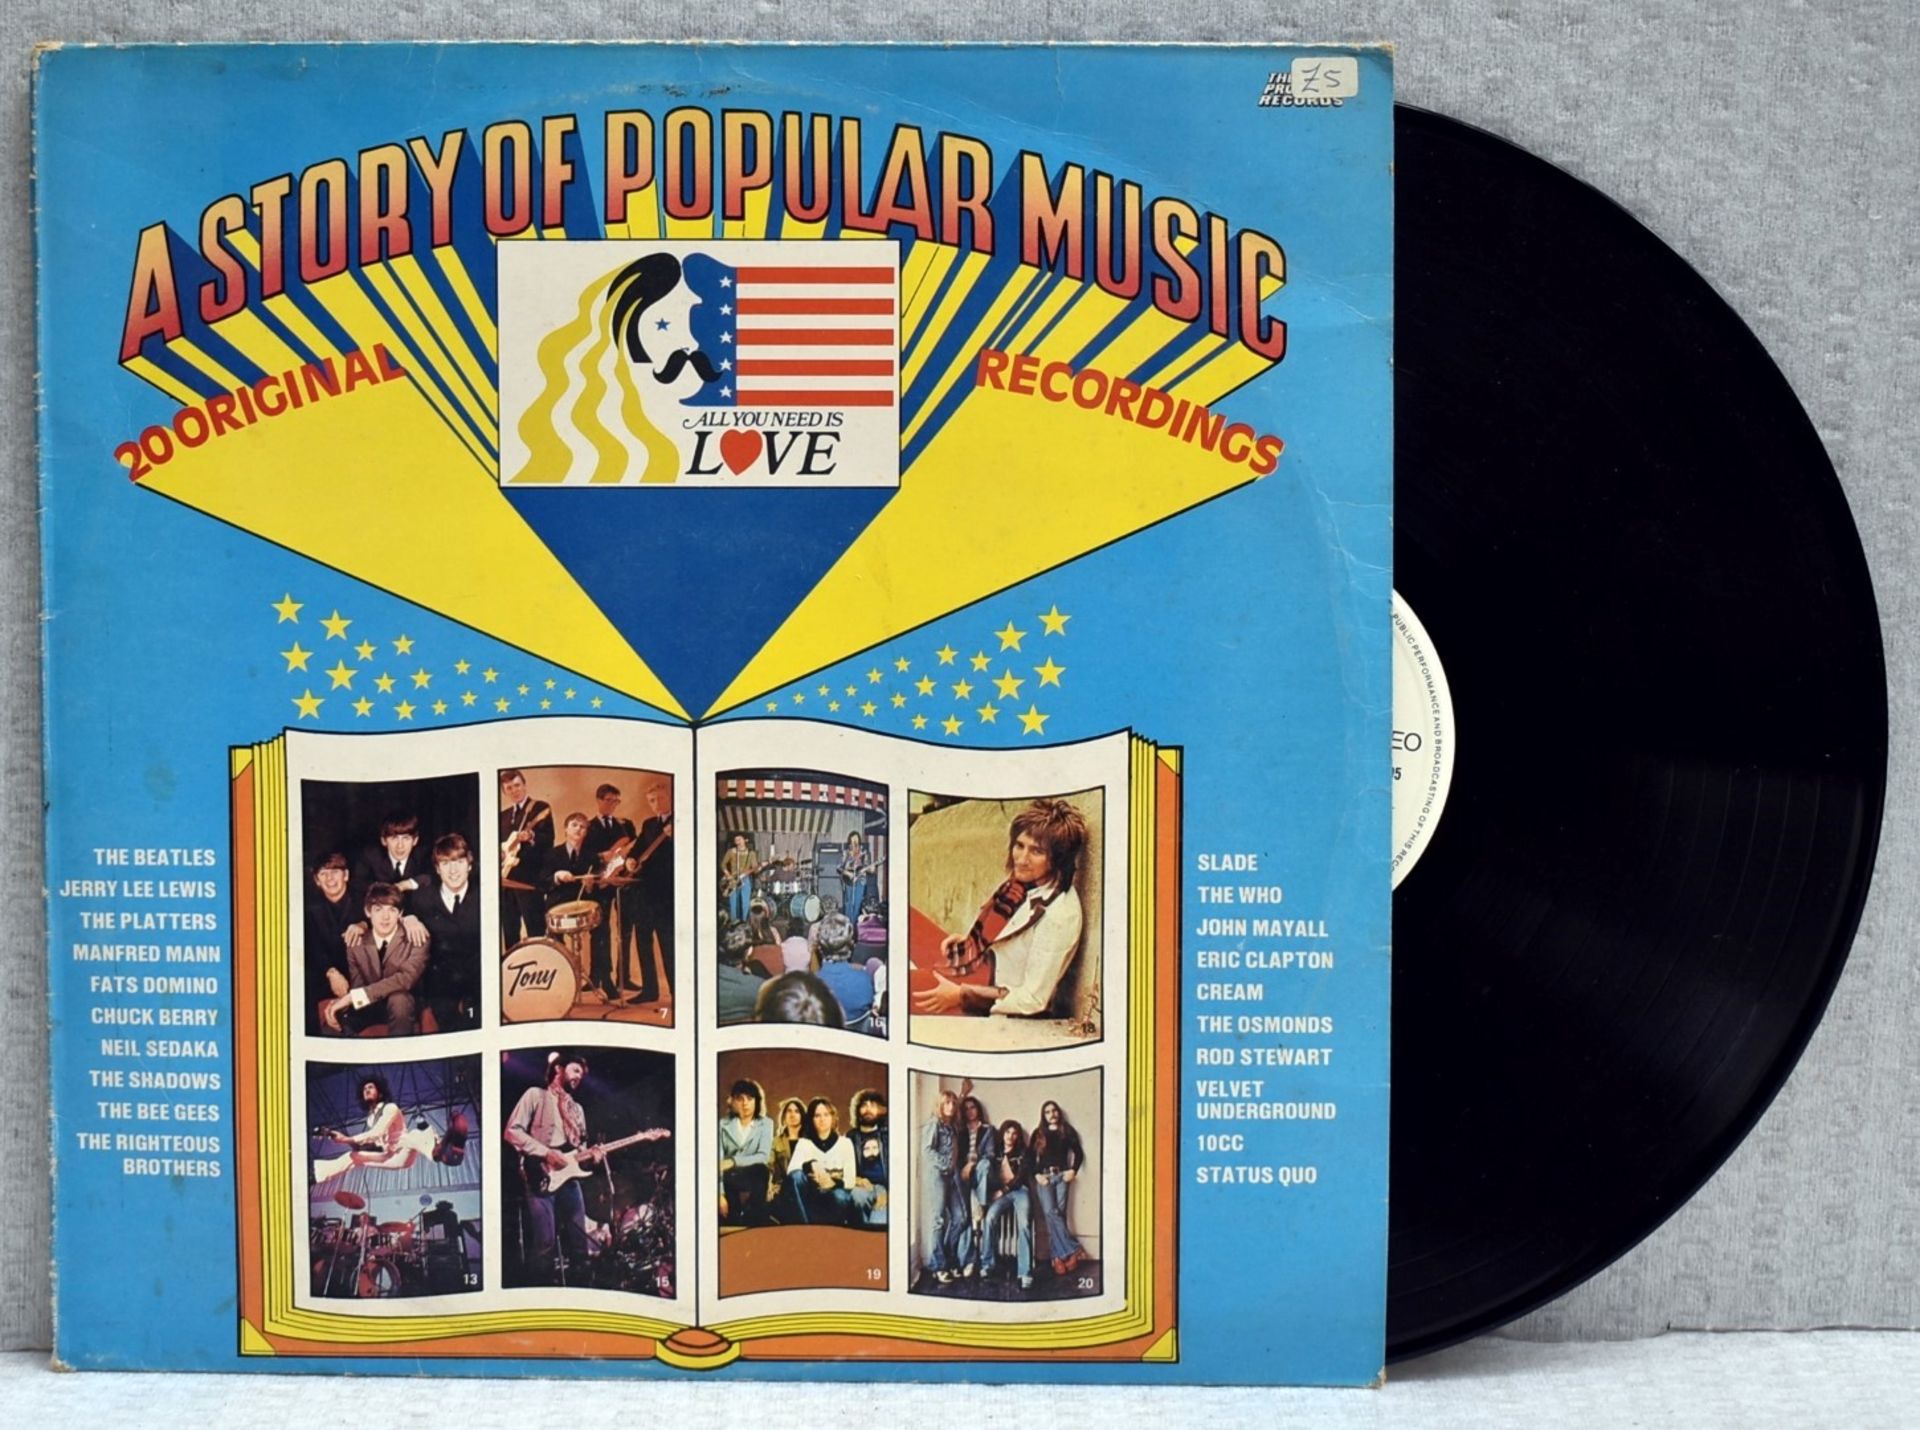 1 x A Story Of Popular Music, 20 Original Recordings by Theatre Projects Records 2 Sided 12 Inch